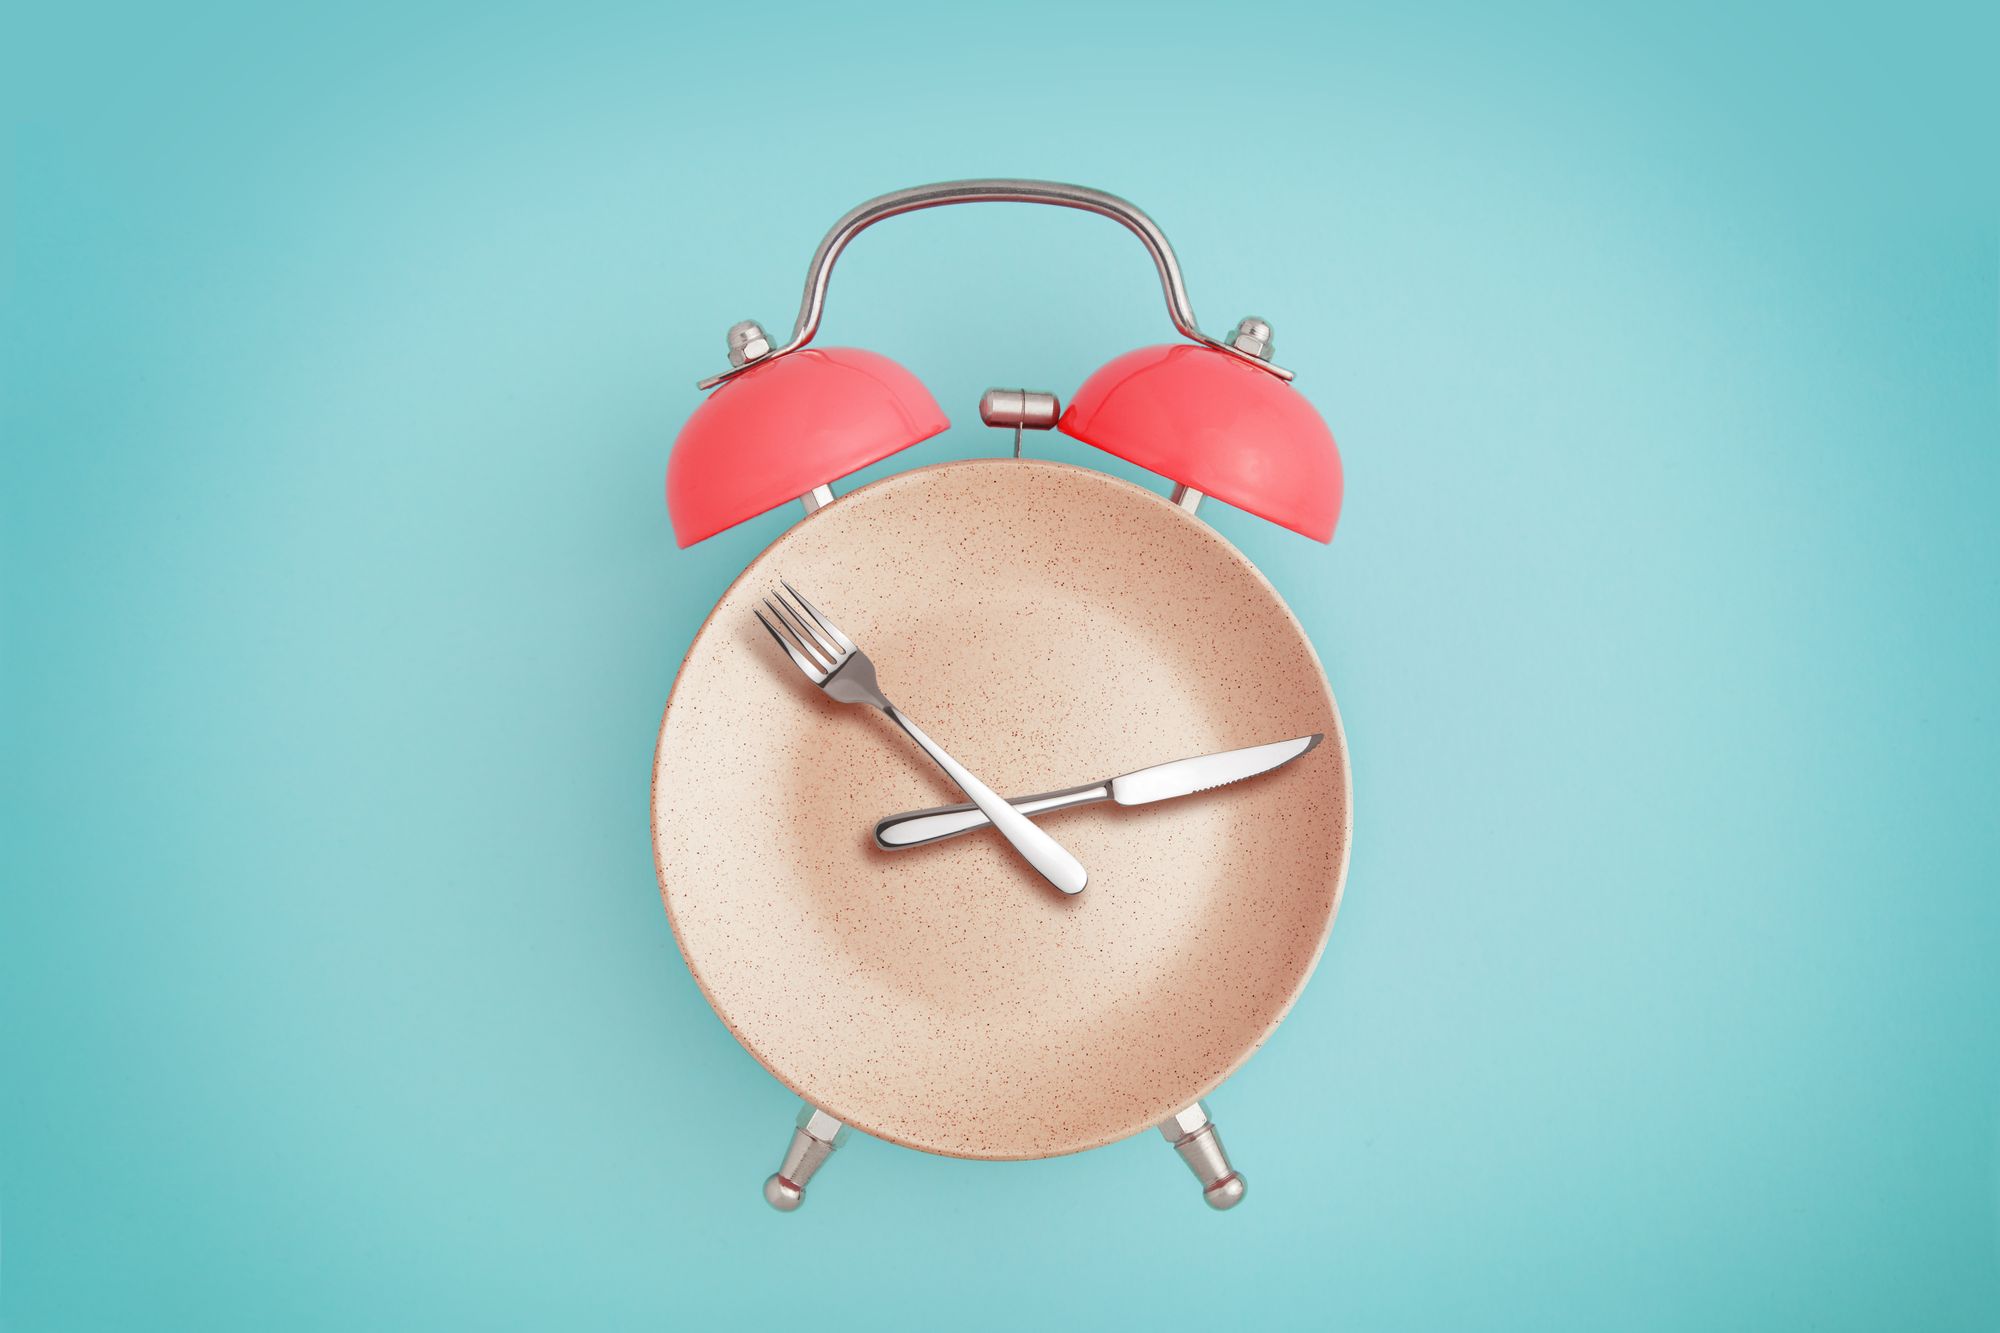 Alarm Clock & Plate With Cutlery By TanyaJoy | www.shutterstock.com